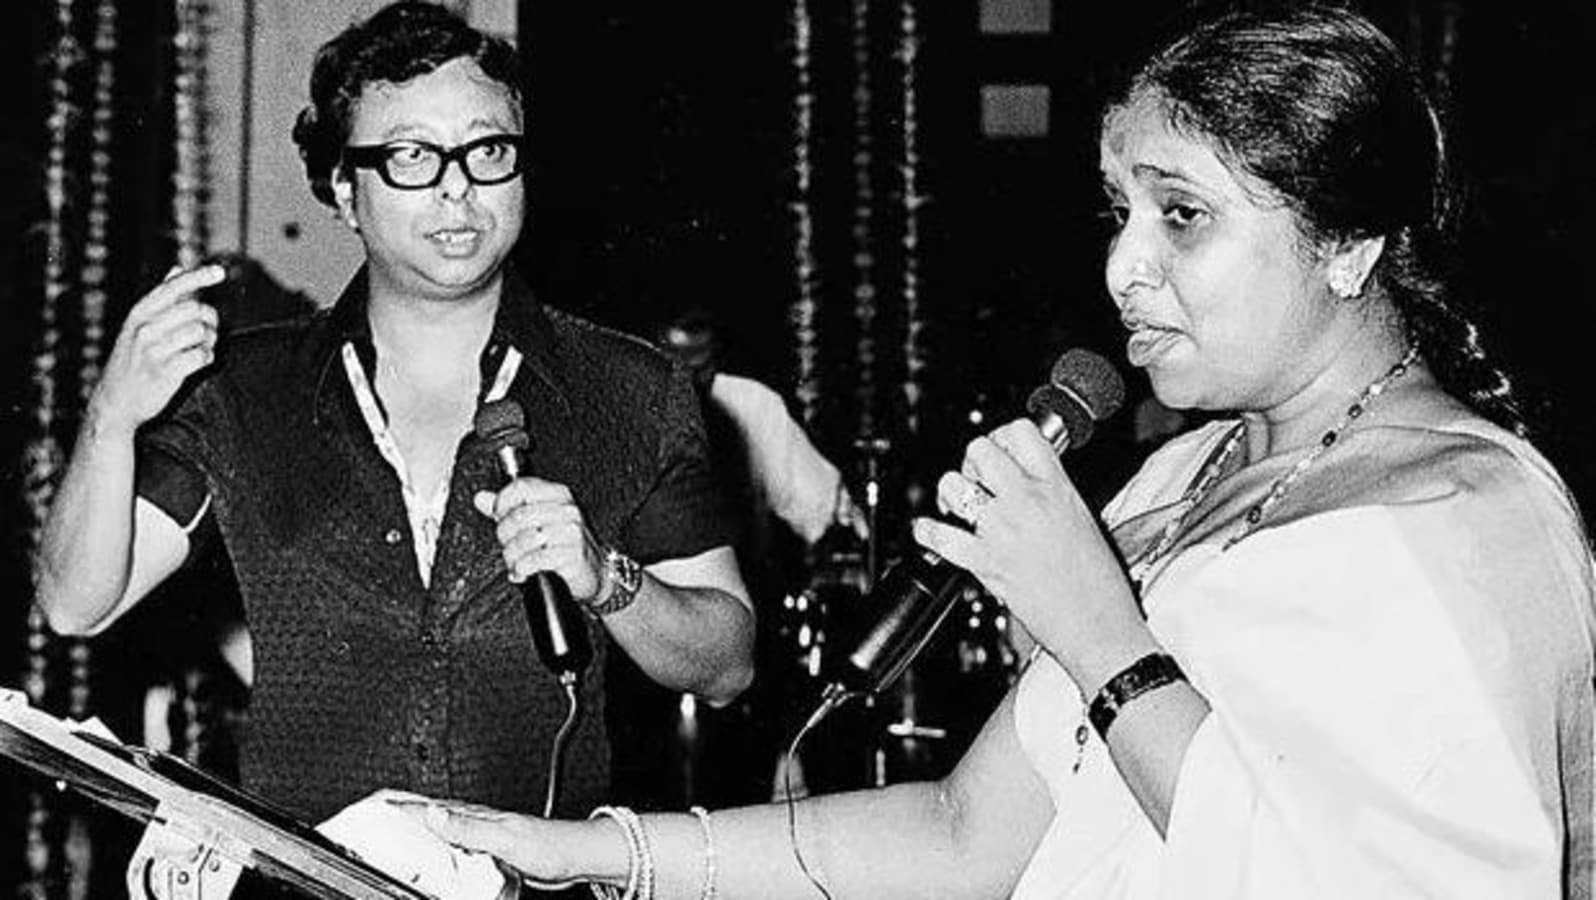 When RD Burman sent Asha Bhosle flowers ‘anonymously’ for years, his ‘face fell’ as she wanted to ‘throw them away’